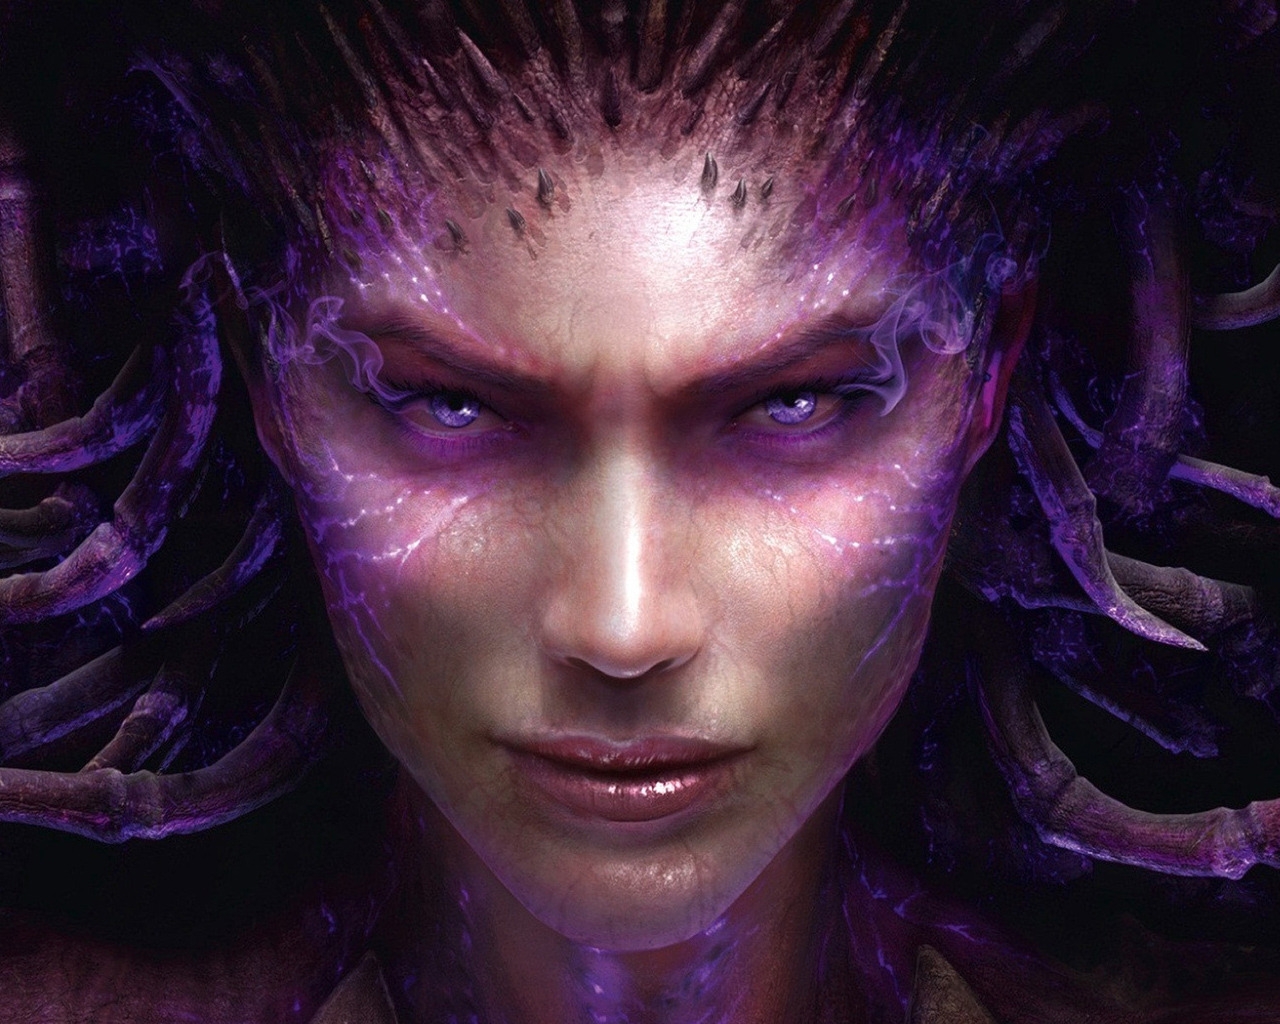 Starcraft 2 Heart of the Swarm for 1280 x 1024 resolution